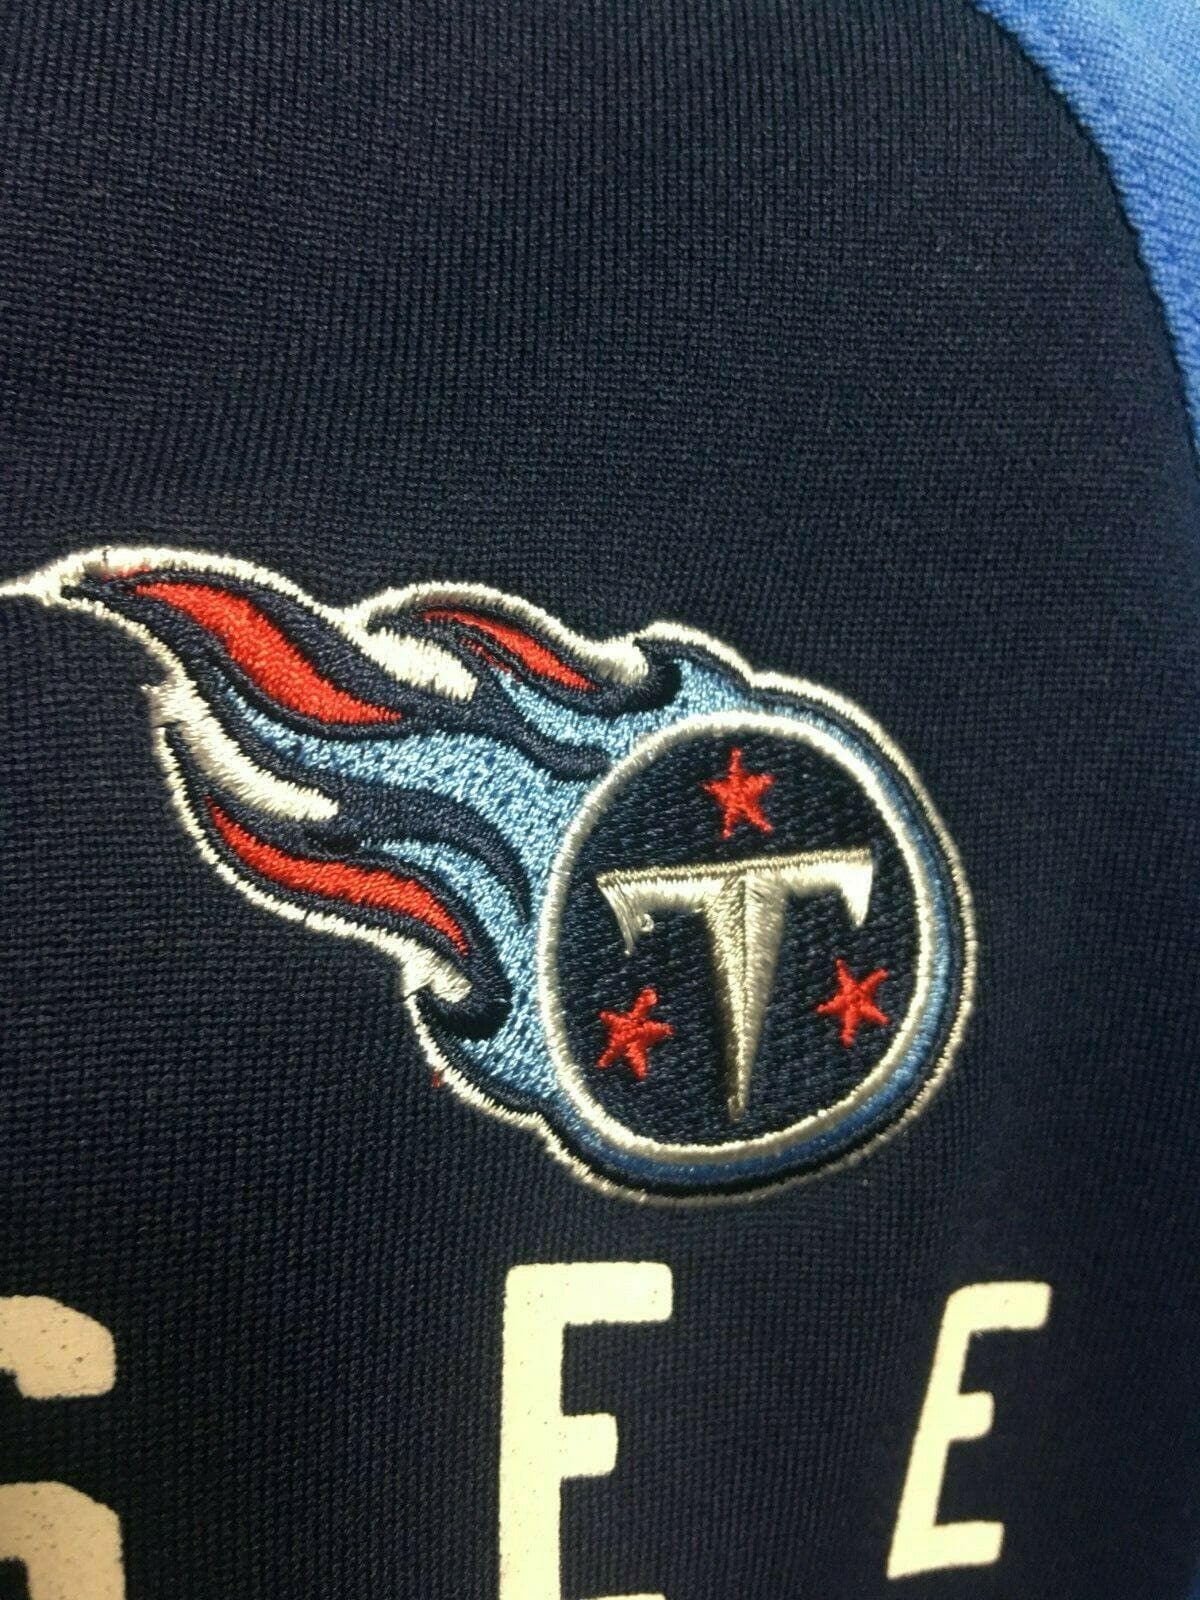 NFL Tennessee Titans Hands High Full Zip Hoodie Men's Large NWT